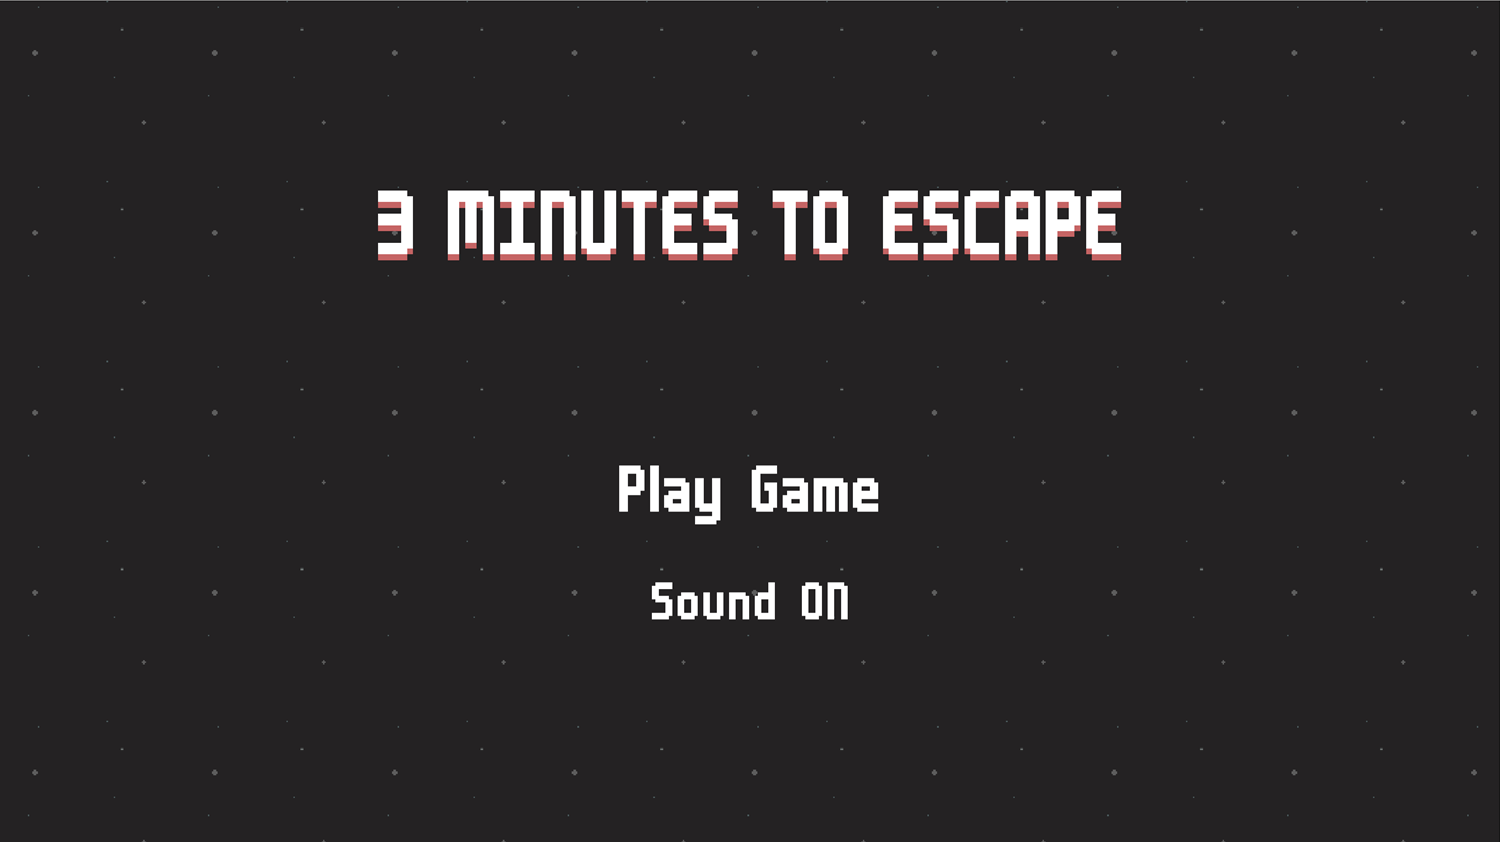 3 Minutes to Escape Game Welcome Screen Screenshot.